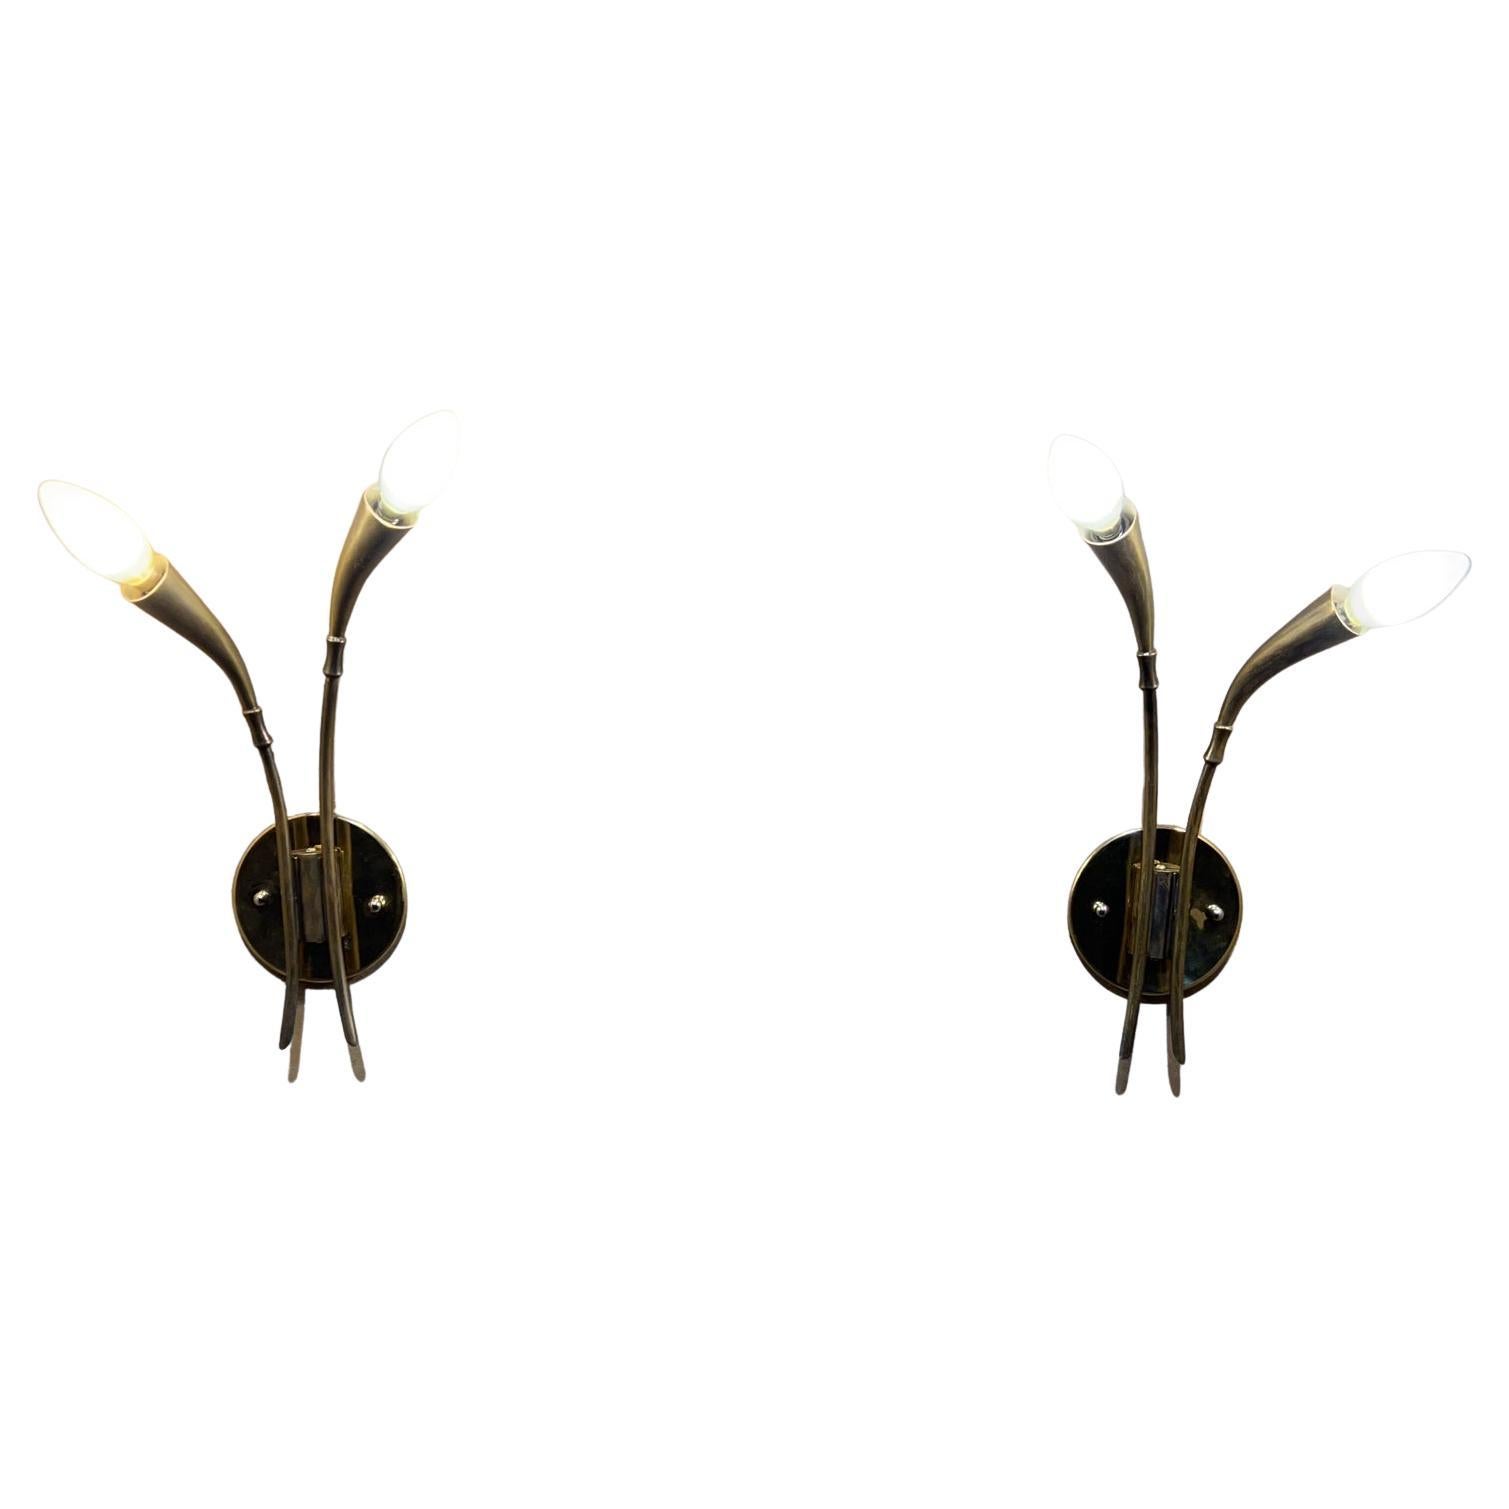 1950s Stilnovo Sculptural Italian Wall Sconces in Patinated Brass Italy For Sale